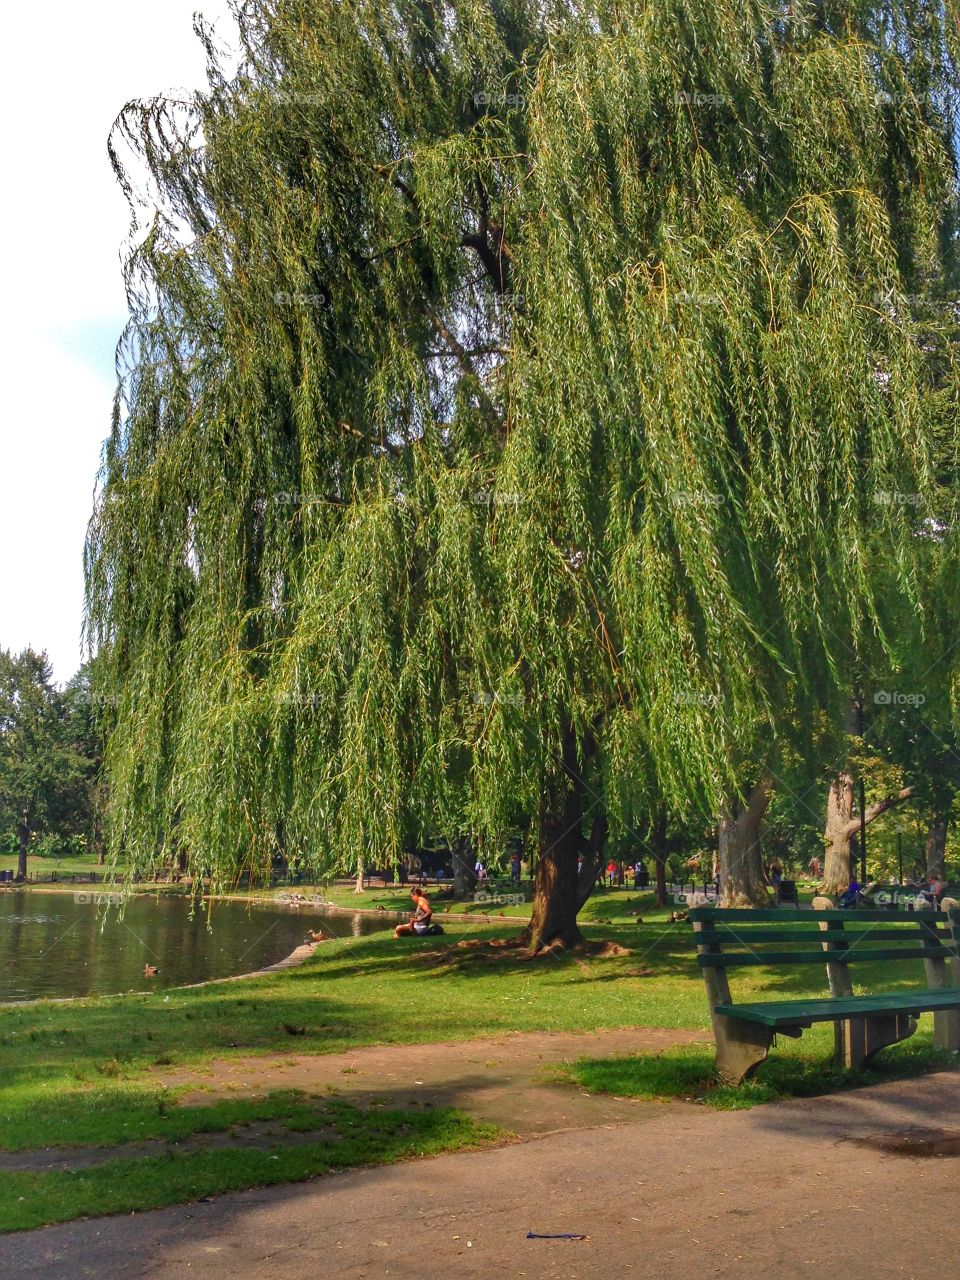 Weeping Willow
Boston, MA